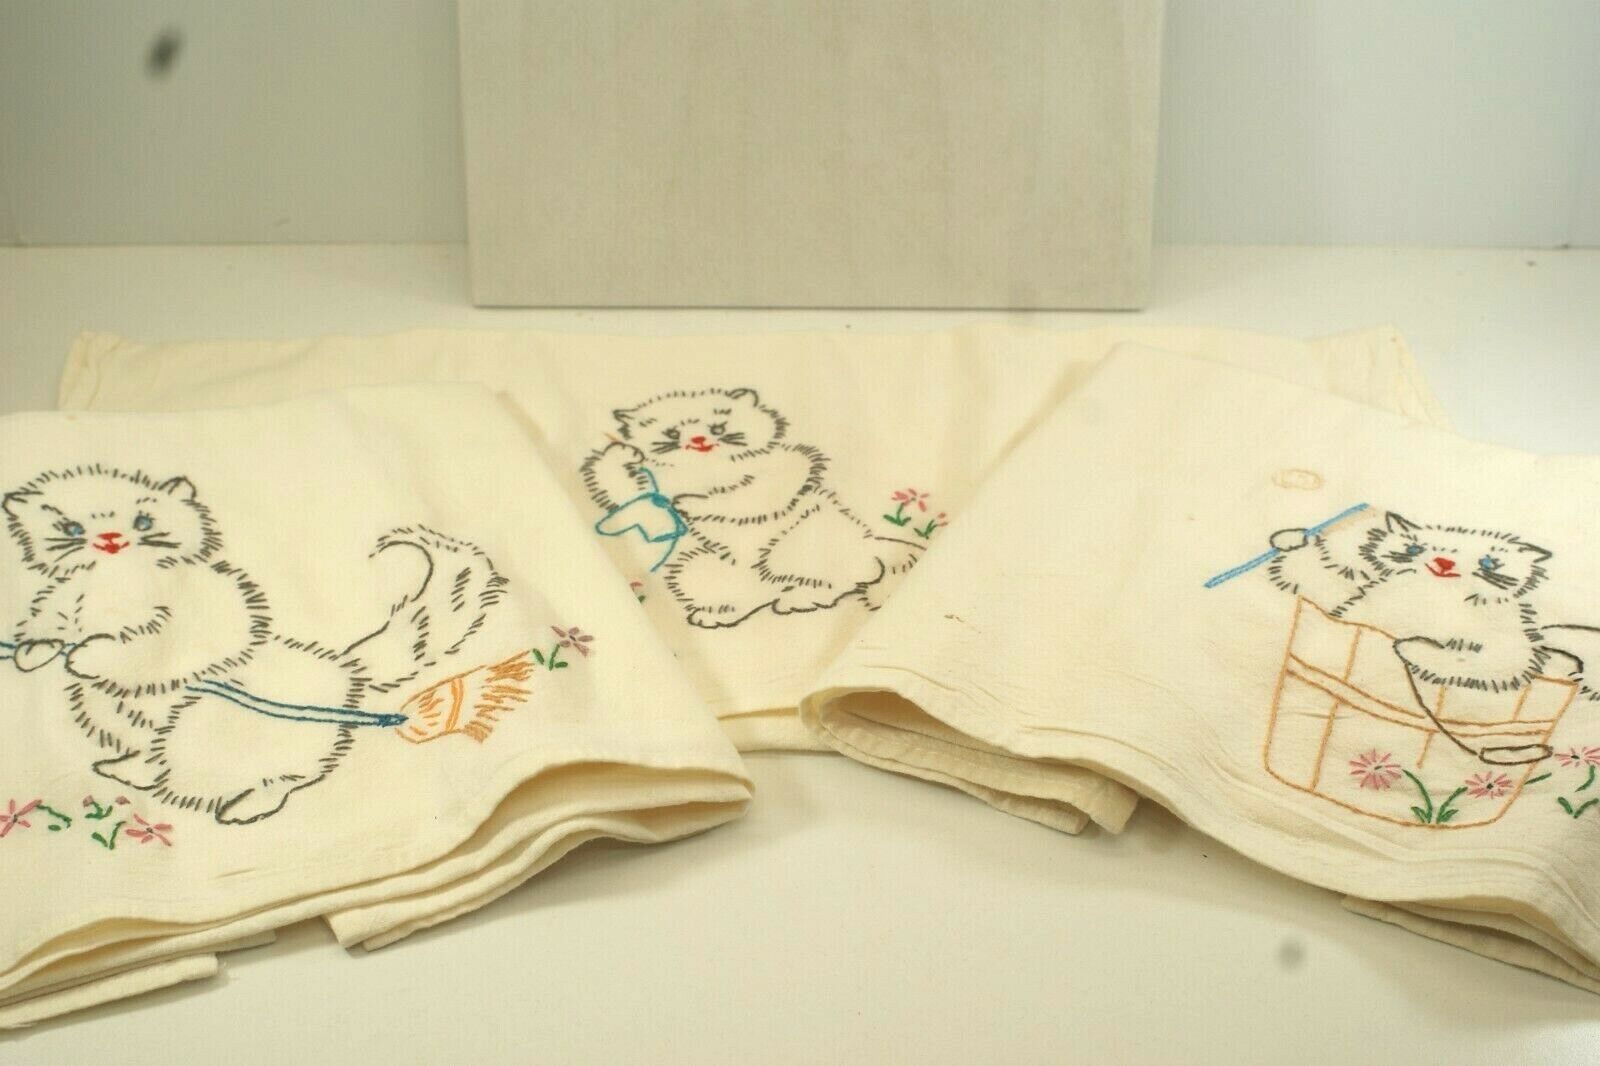 Lot of 3 Vintage Dish or Tea Towels, Cats or Kittens, Embroidered, 20 X 36 in